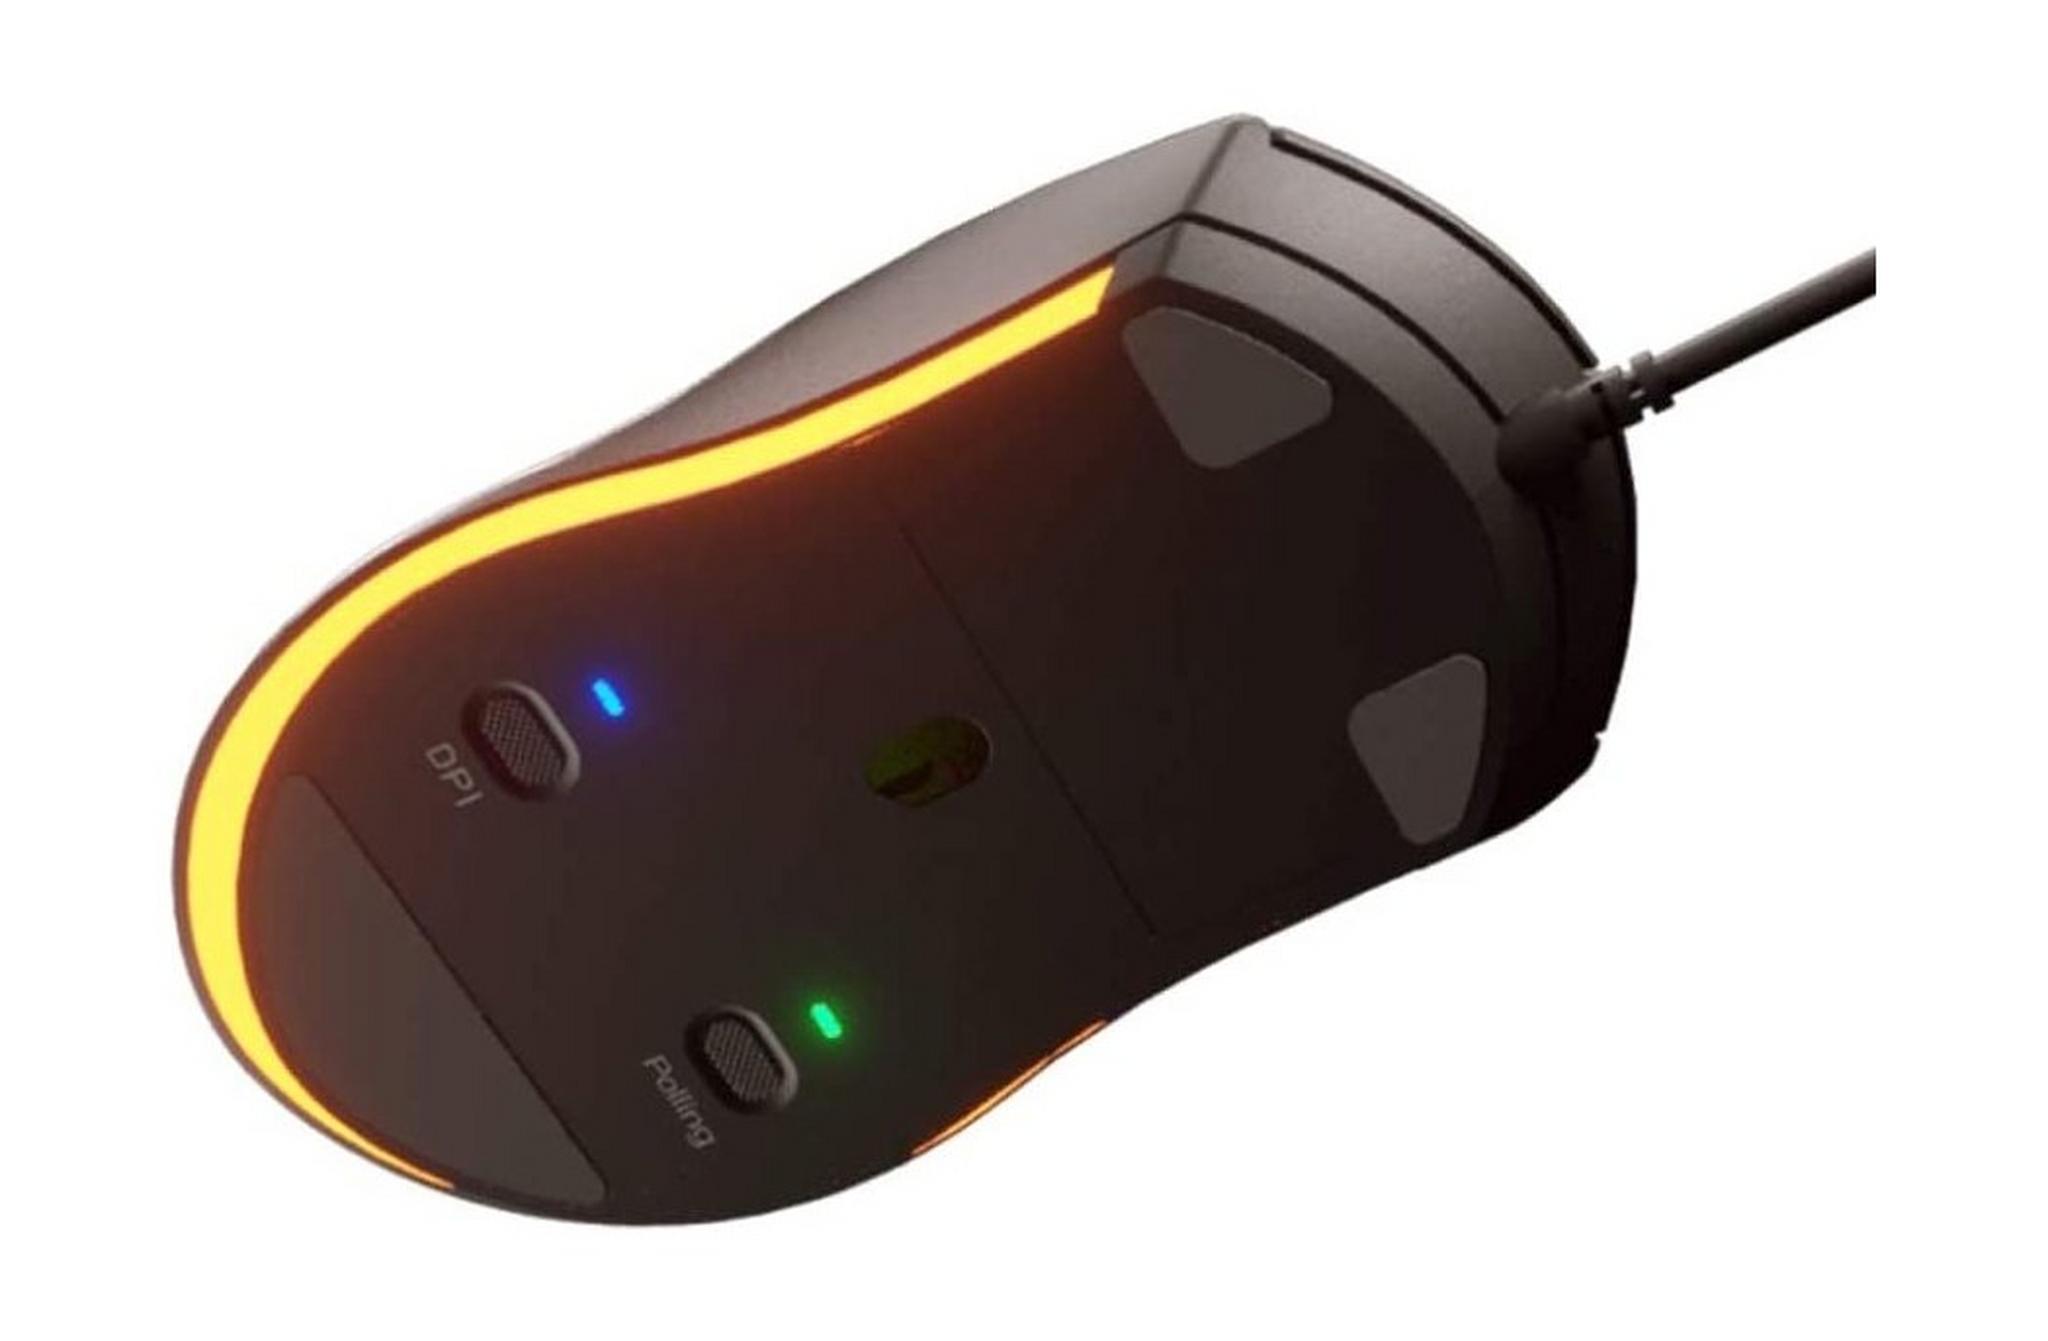 Cougar Mice Optical Minos XC 4000 dpi with Mouse Pad Small - Black